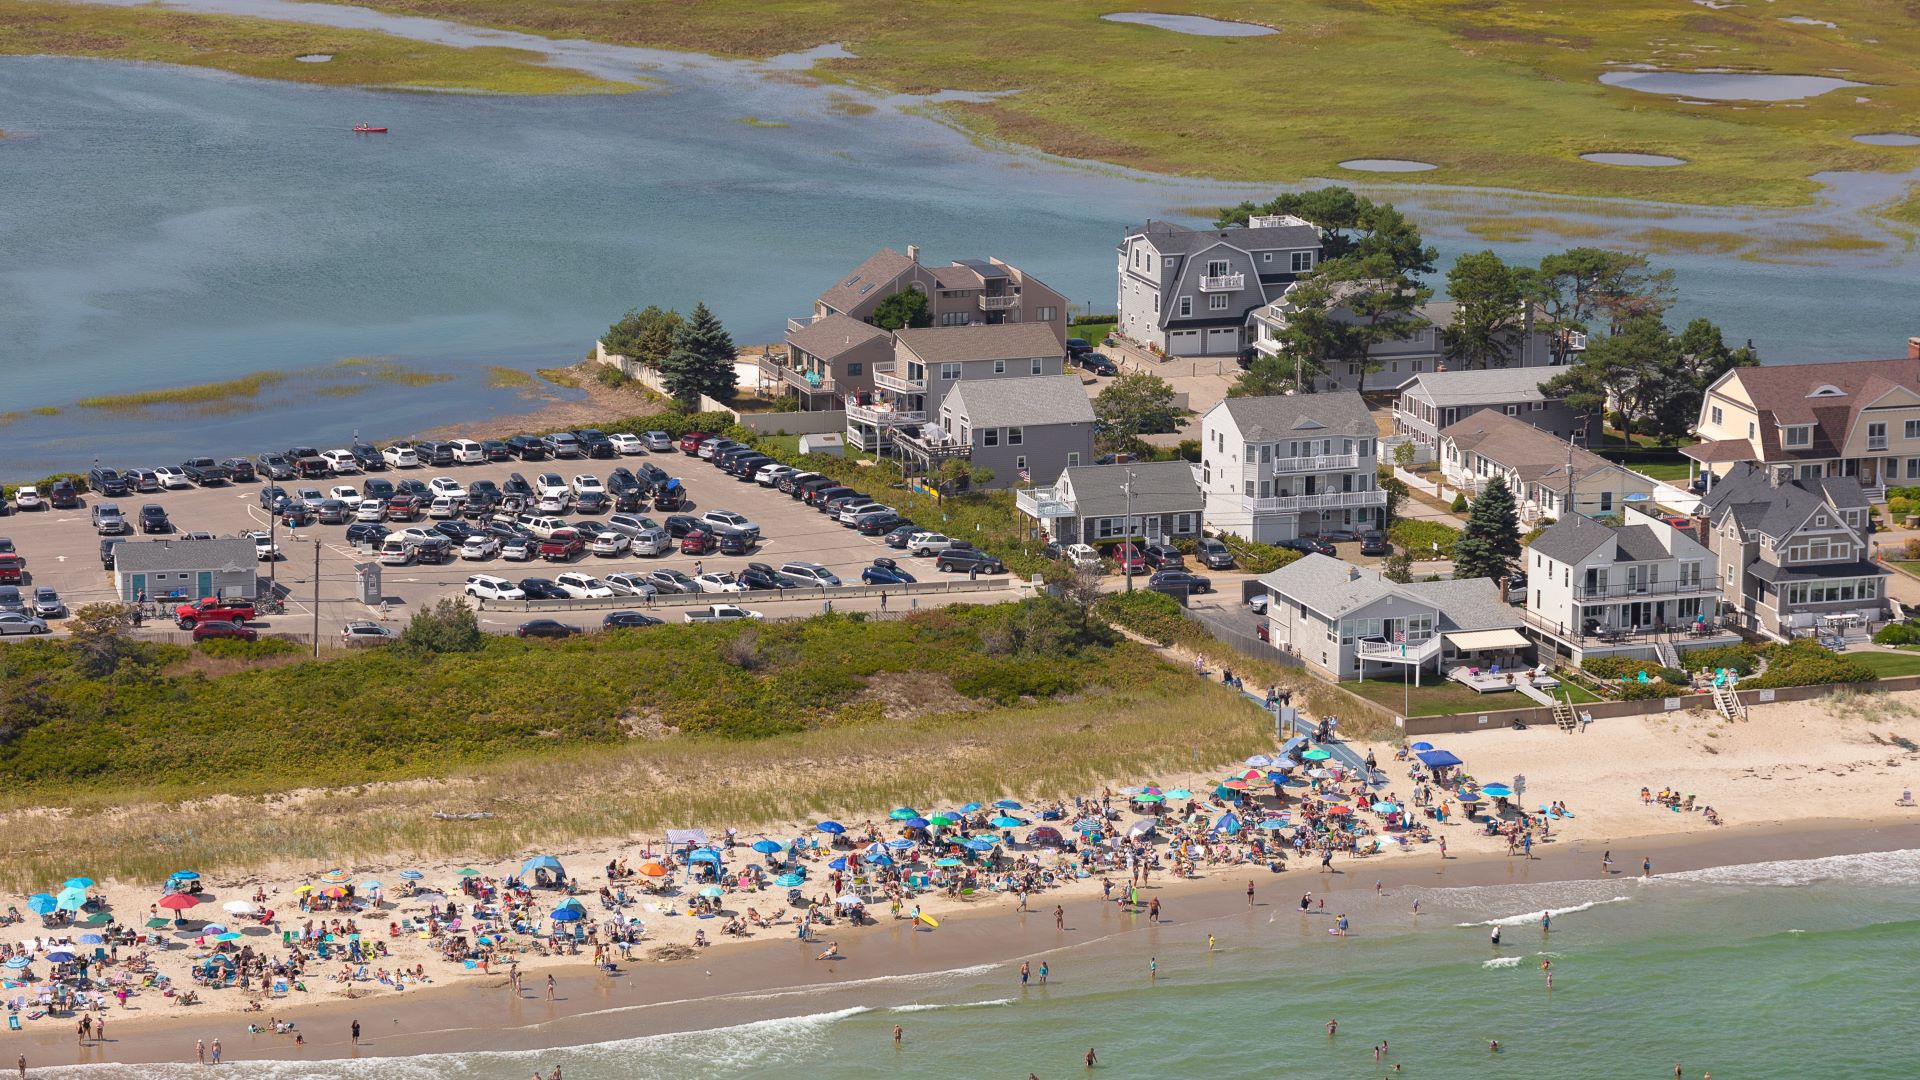 Aerial view of a beach in Wells filled with beachgoers. Behind the beach are rows of houses and a parking lot, all at risk of the surrounding water